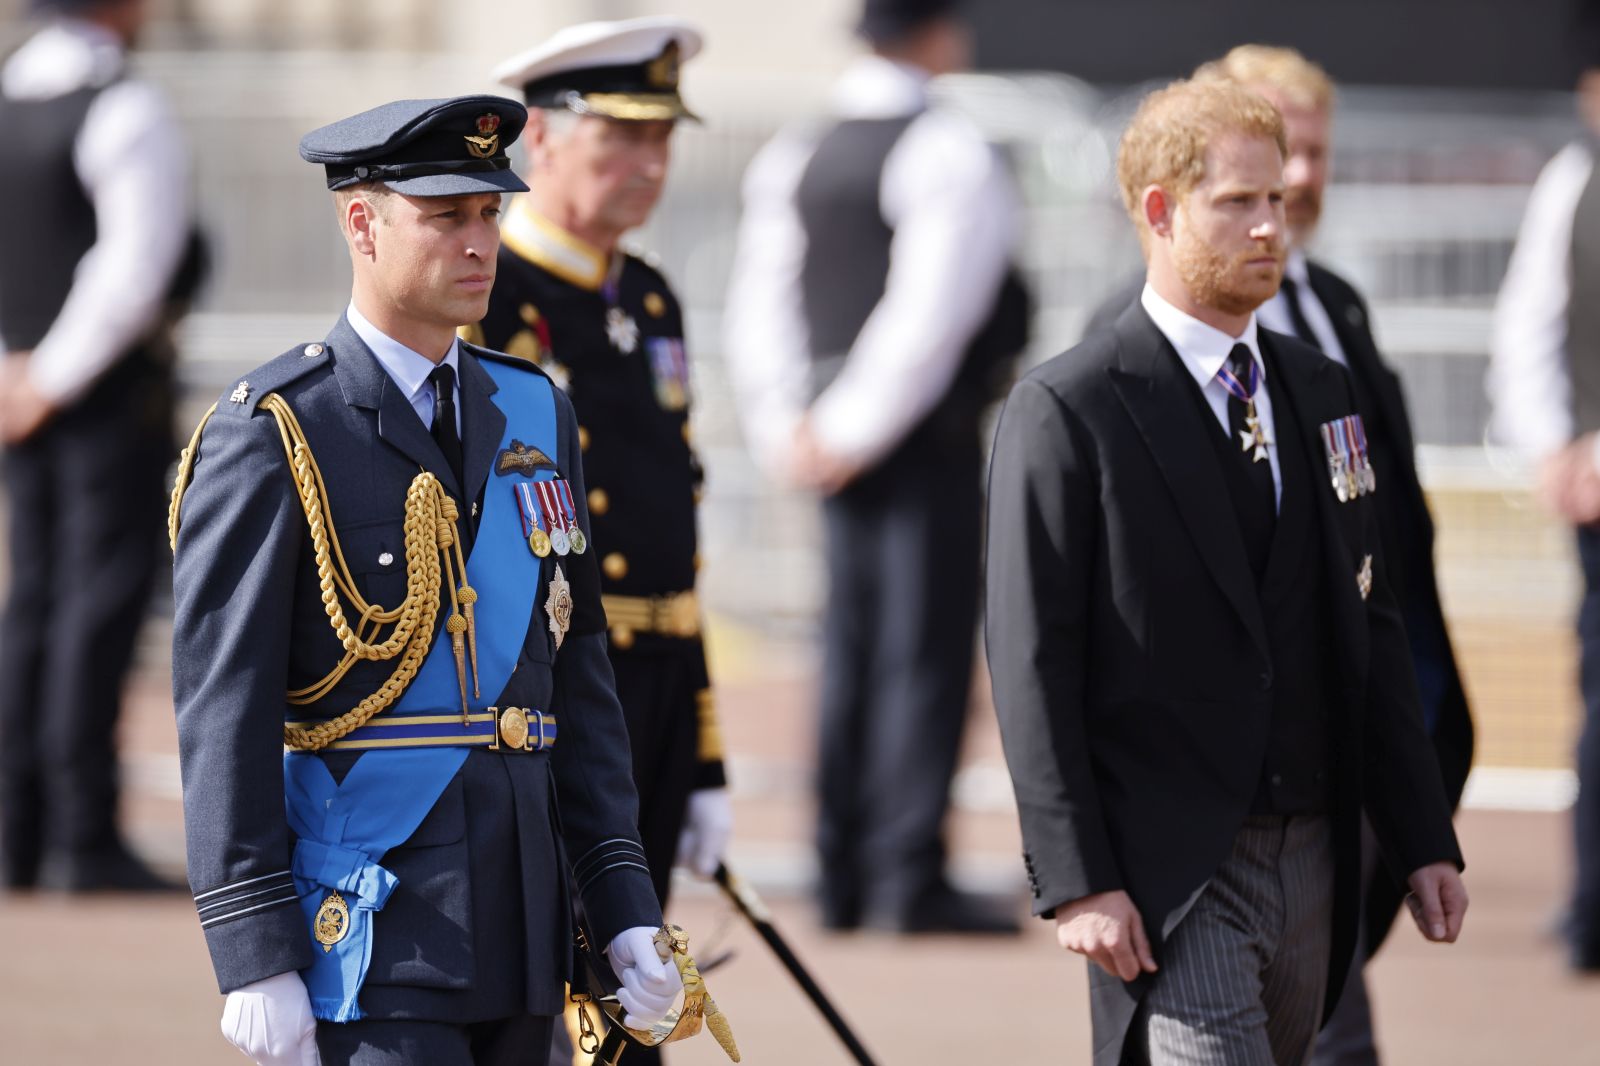 epa10183700 Britain's William, Prince of Wales (L) and Prince Harry, Duke of Sussex (R) follow the coffin containing the body of Queen Elizabeth II as it makes its way from Buckingham Palace to Westminster Hall in London, Britain, 14 September 2022. After a short service, the Queen’s lying in state will begin, lasting for four days and ending on the morning of the state funeral on the 19 September.  EPA/TOLGA AKMEN